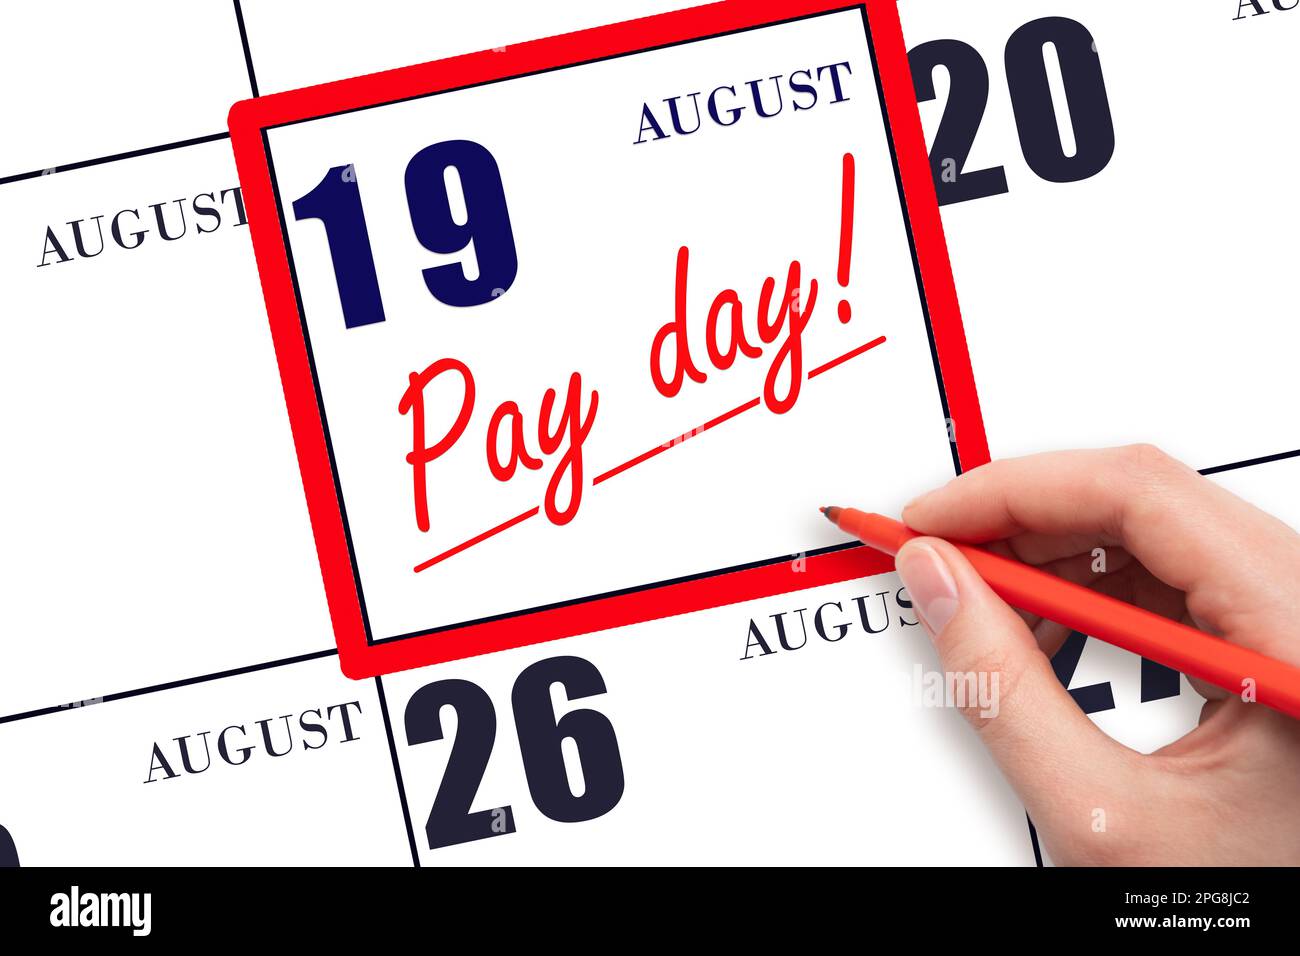 19th day of August. Hand writing text PAY DATE on calendar date August 19 and underline it. Payment due date. Reminder concept of payment. Summer mont Stock Photo